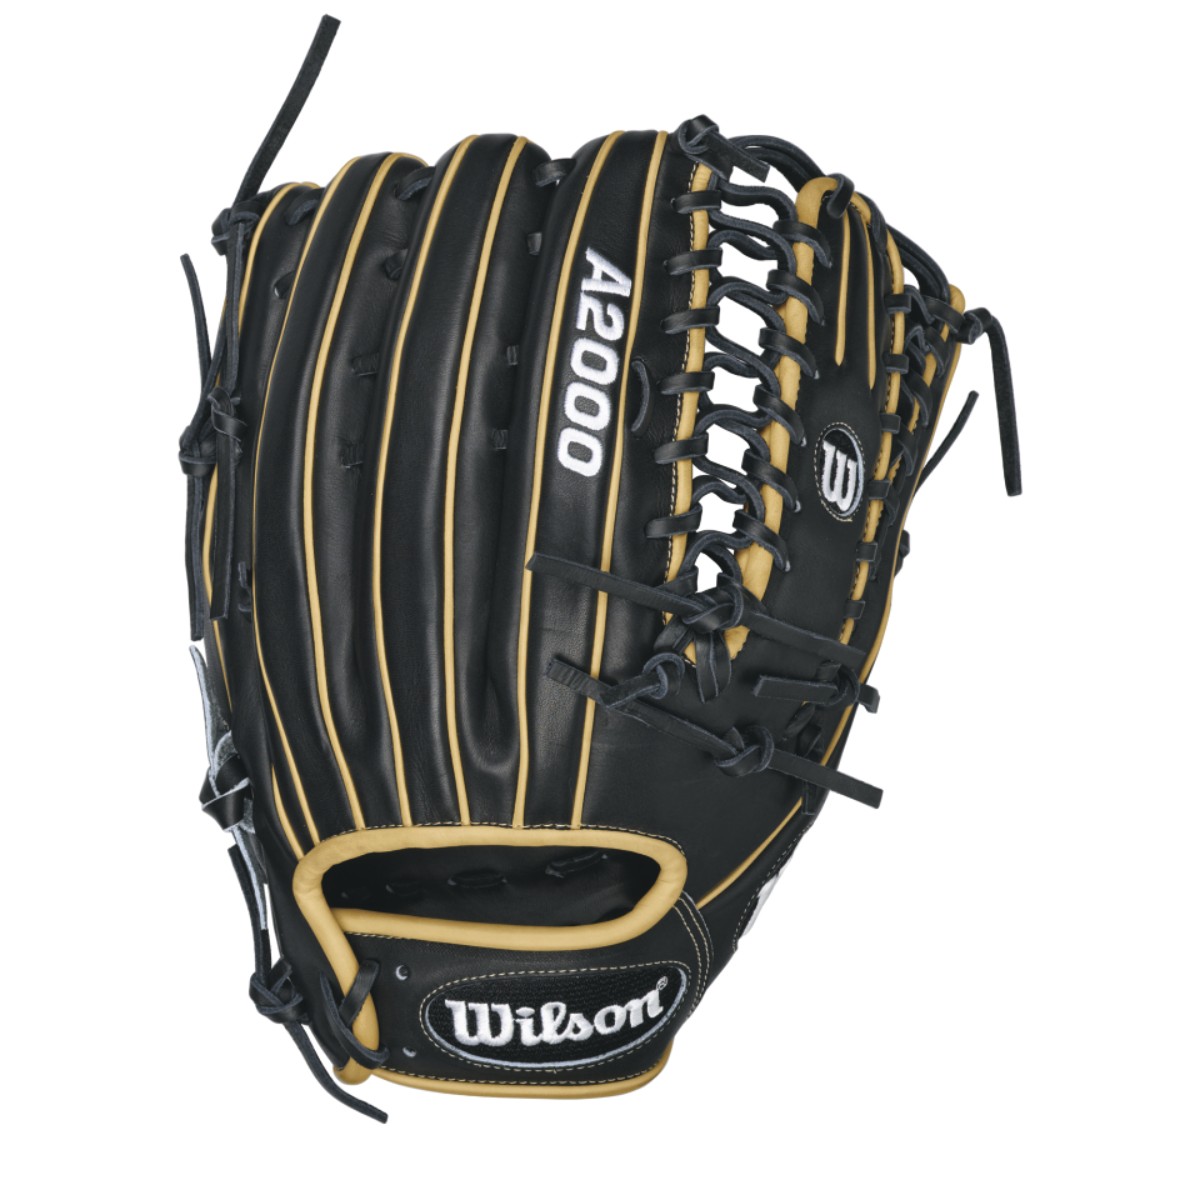 A2000 OT6 SS - 12.75 Wilson A2000 OT6 Super Skin Outfield Baseball GloveA2000 OT6 Super Skin 12.75 Outfield Baseball Glove - Right Hand Throw A2000 OT6 Super Skin 12.75 Outfield Baseball Glove - Left Hand Throw WTA20RB16OT6SSWTA20LB16OT6SSThe A2000 OT6 SS features a one-piece, six finger palm and web. It's perfect for outfielders looking for a longer glove with more feel and less rebound. Designed with black and Saddle Tan Pro Stock Leather and glove-lightening Super Skin, the A2000 OT6 plays great with two fingers in the pinky stall. The A2000 Super Skin baseball glove series is the utility player of the Wilson lineup. A versatile mix of Pro Stock Leather and man-made Super Skin makes the glove stonger, lighter and easier to break in that the all-leather A2000. 12.75 Outfield ModelSix Finger Trap WebPro Stock Leather combined with Super Skin for a light, long lasting glove and a great break-inDual Welting for a durable pocketDriLex Wrist Lining to keep your hand cool and dryAvailable in right hand throw and left hand throw Outfield both12.75 6 finger trap web Pro Stock Leather A2000 1799 SS A2000 OT6A2000 T-shirtWilson Glove Care KitAso-San Glove Mallet Aso breaks in Outfield Glove